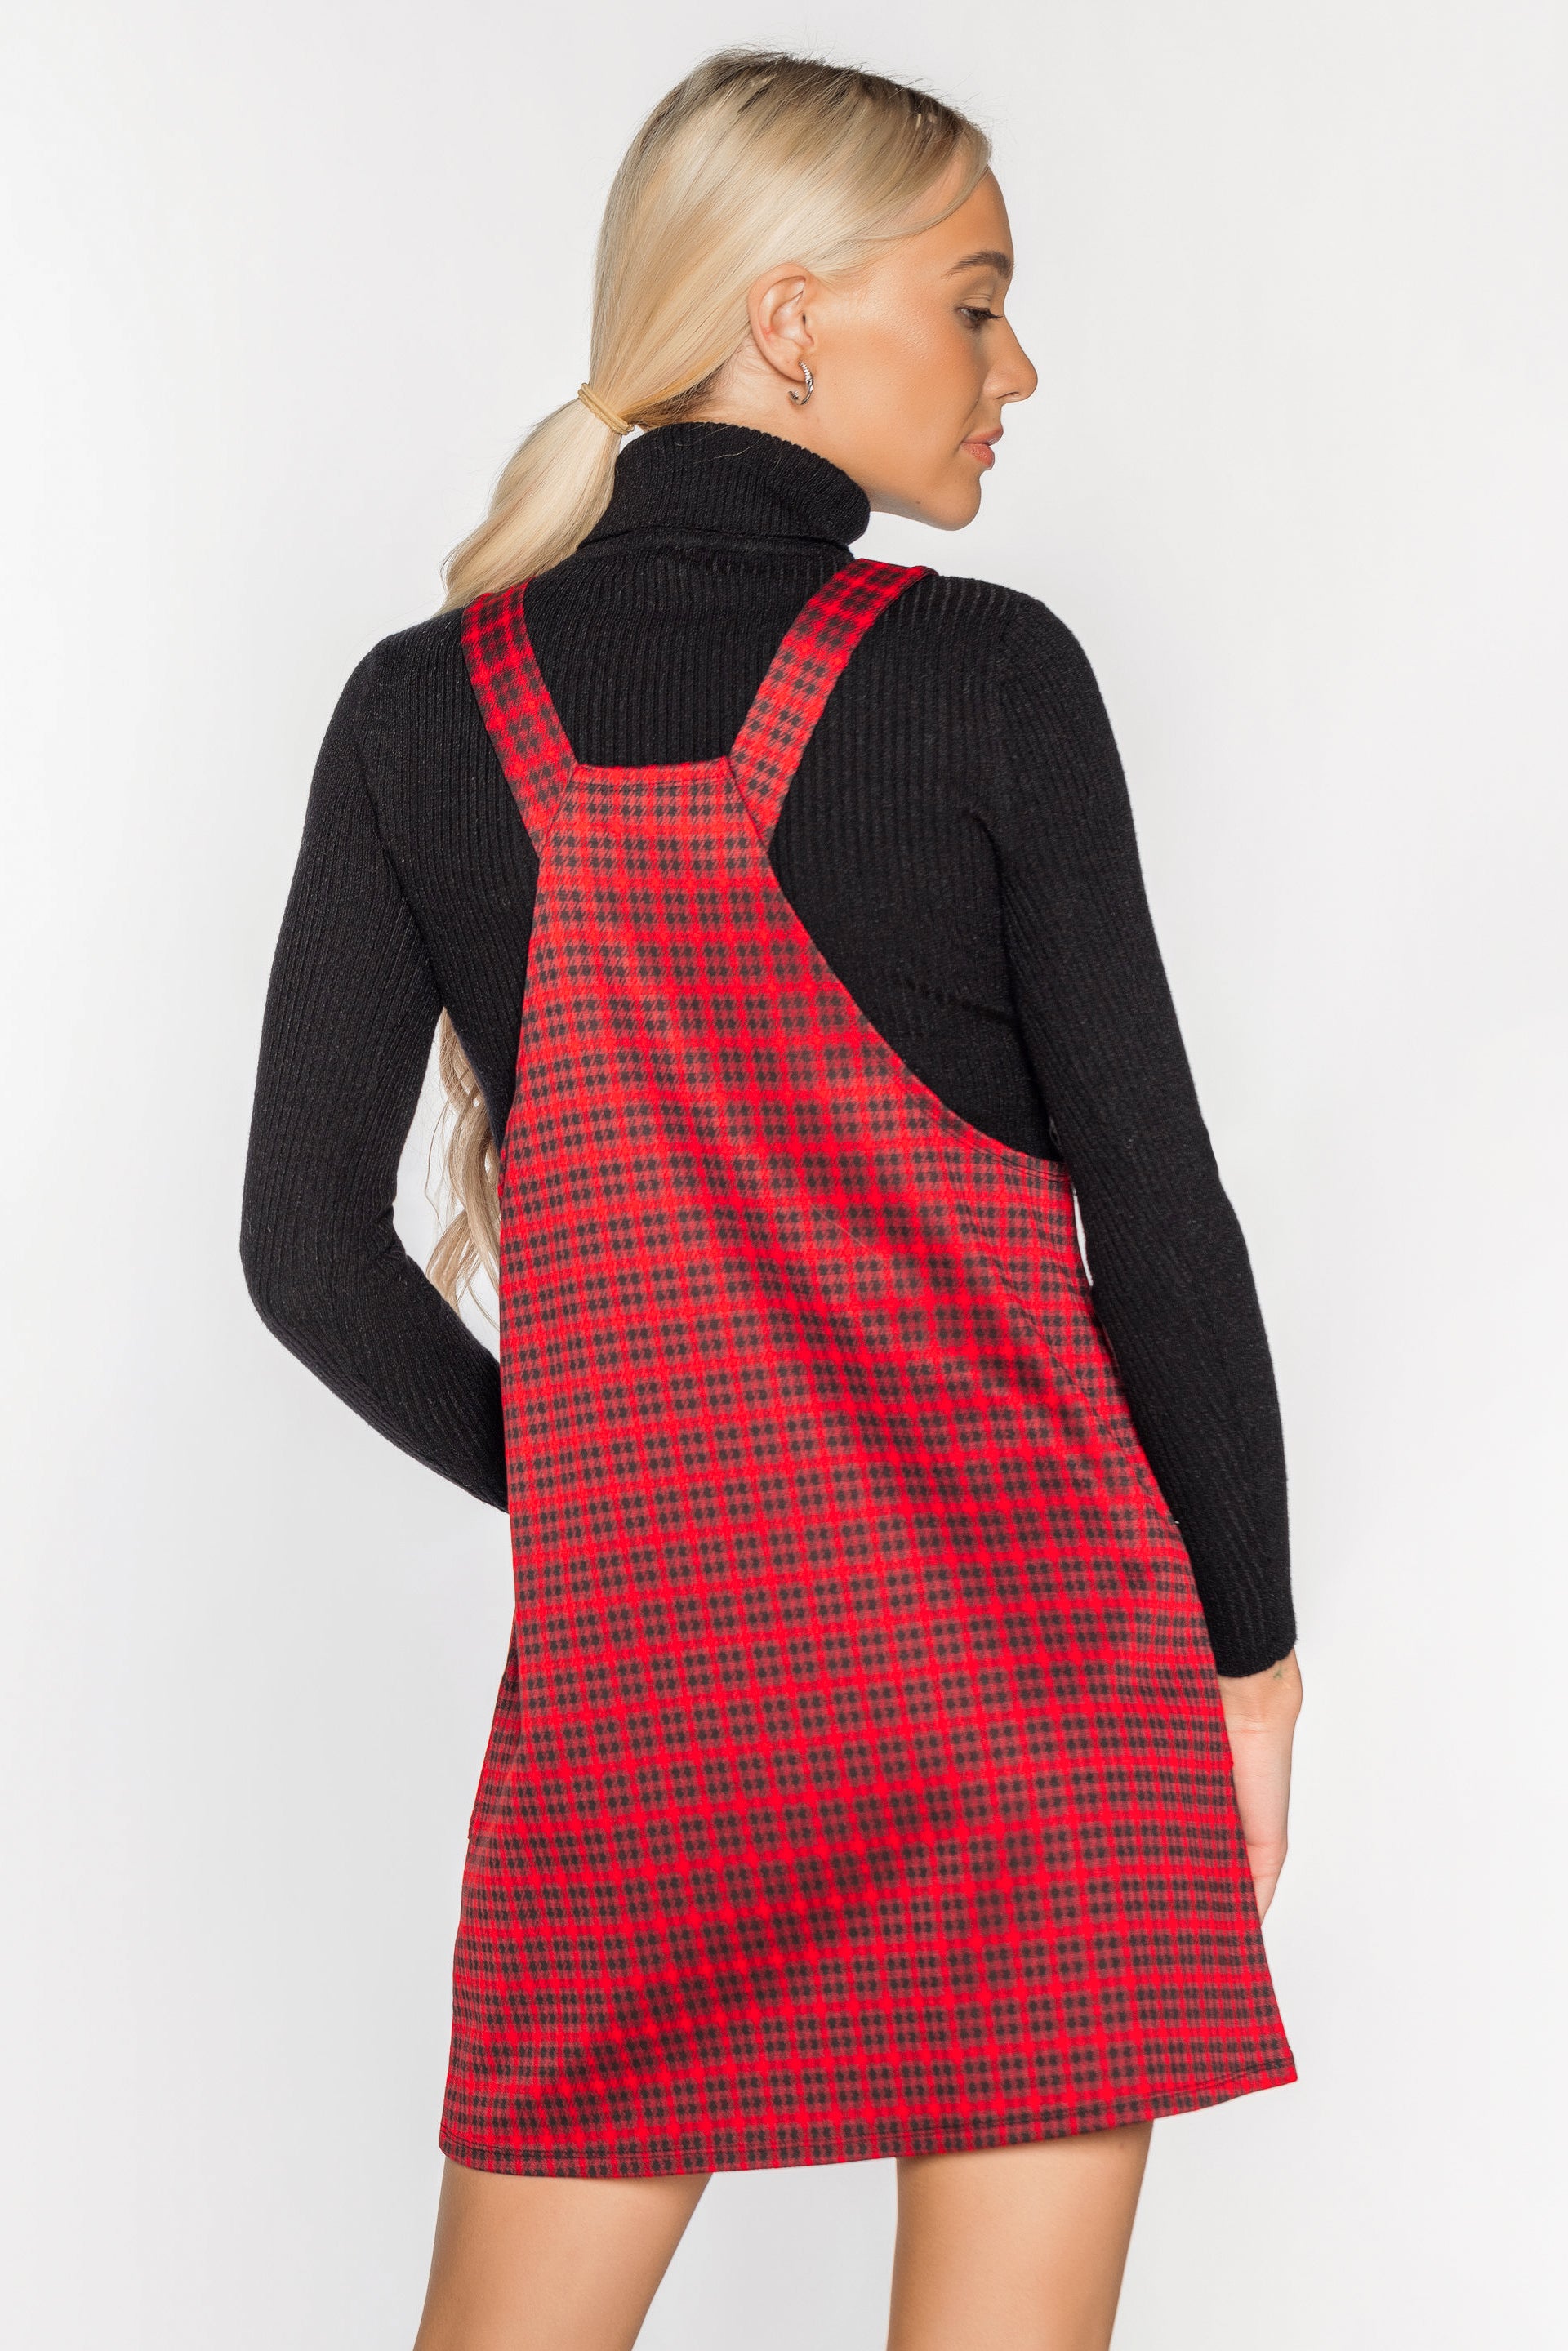 Mollie Jumper with Buckles